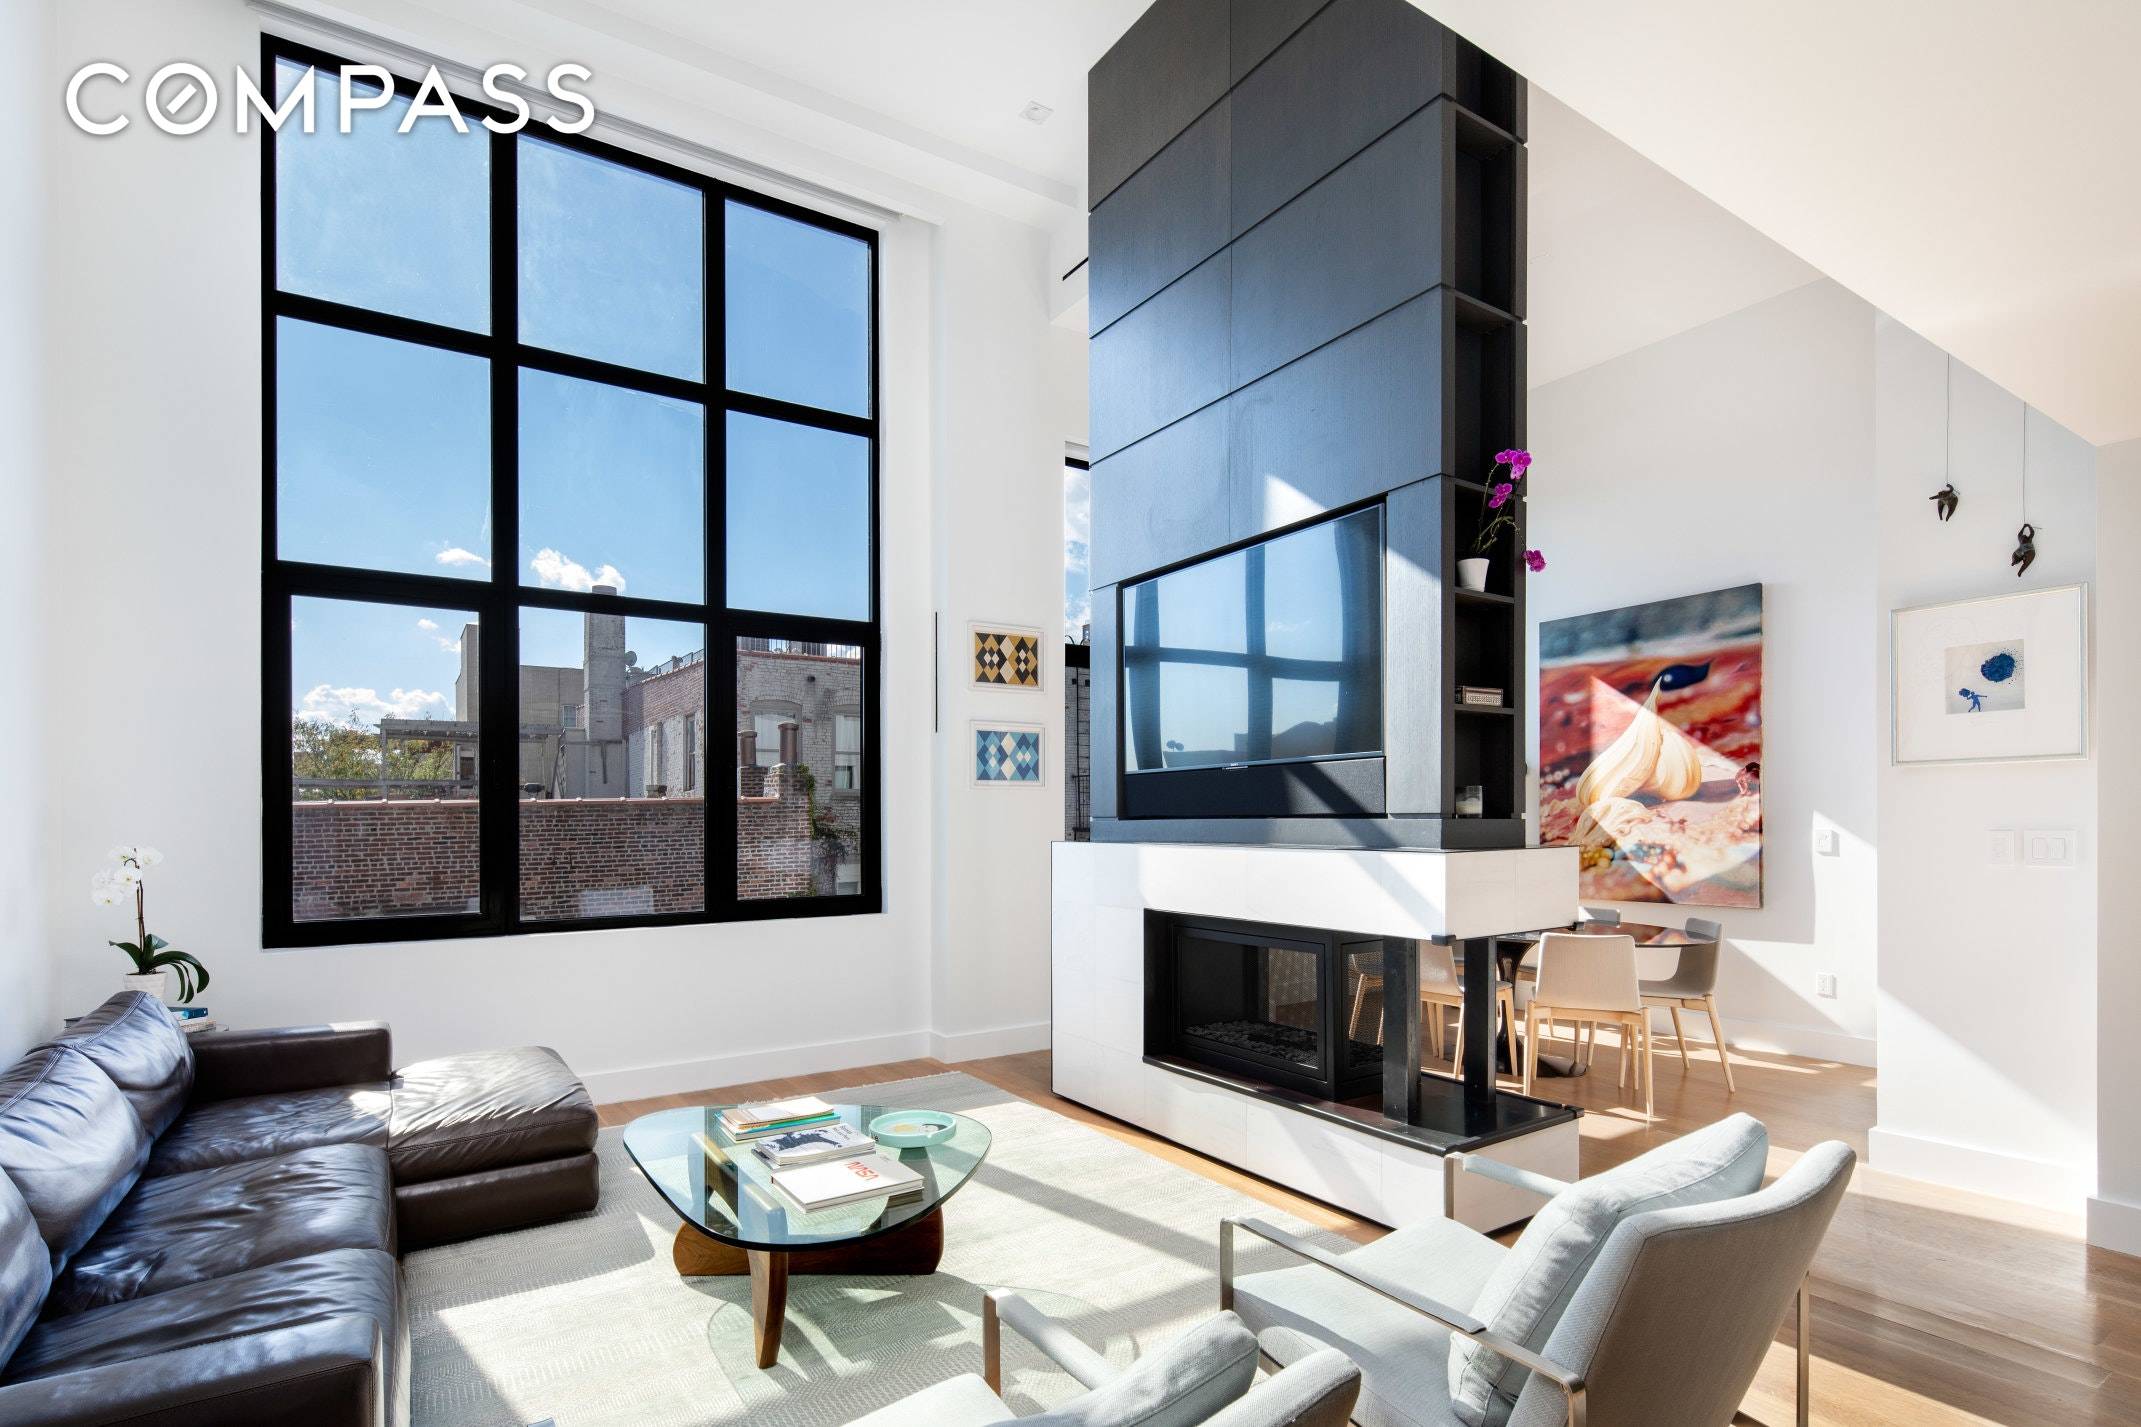 172 North 10th Street is a rare Williamsburg condo conversion comprised of 14 bespoke lofts, housed within a century old manufacturing building.